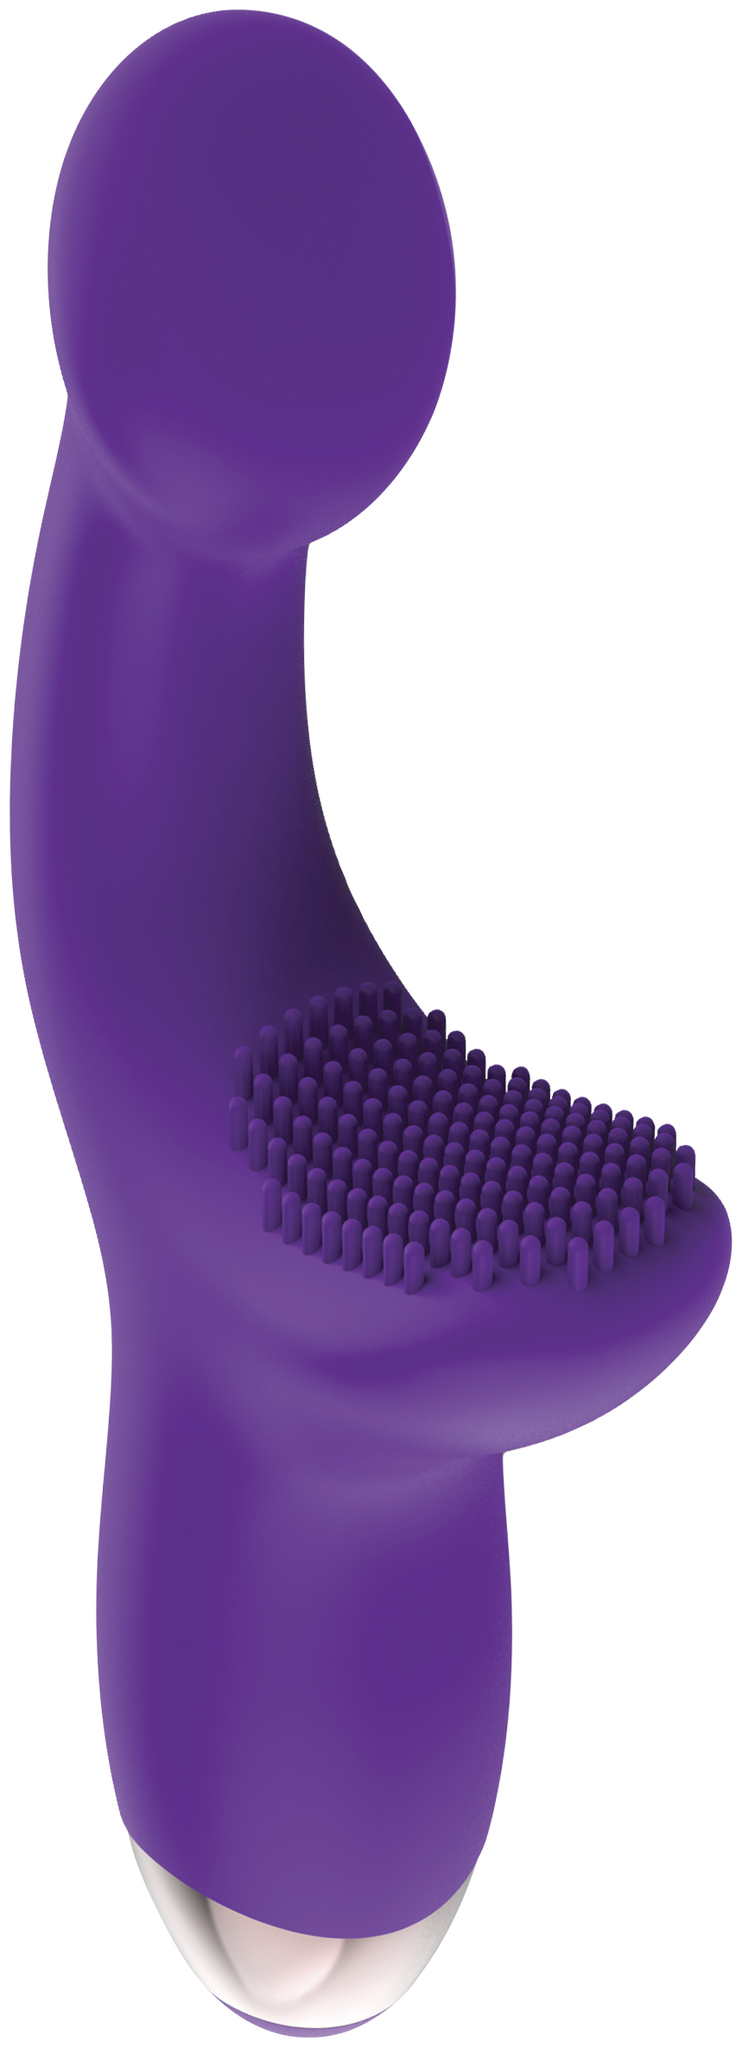 ADAM & EVE SILICONE G-SPOT PLEASER RECHARGEABLE - ENAEWF70512